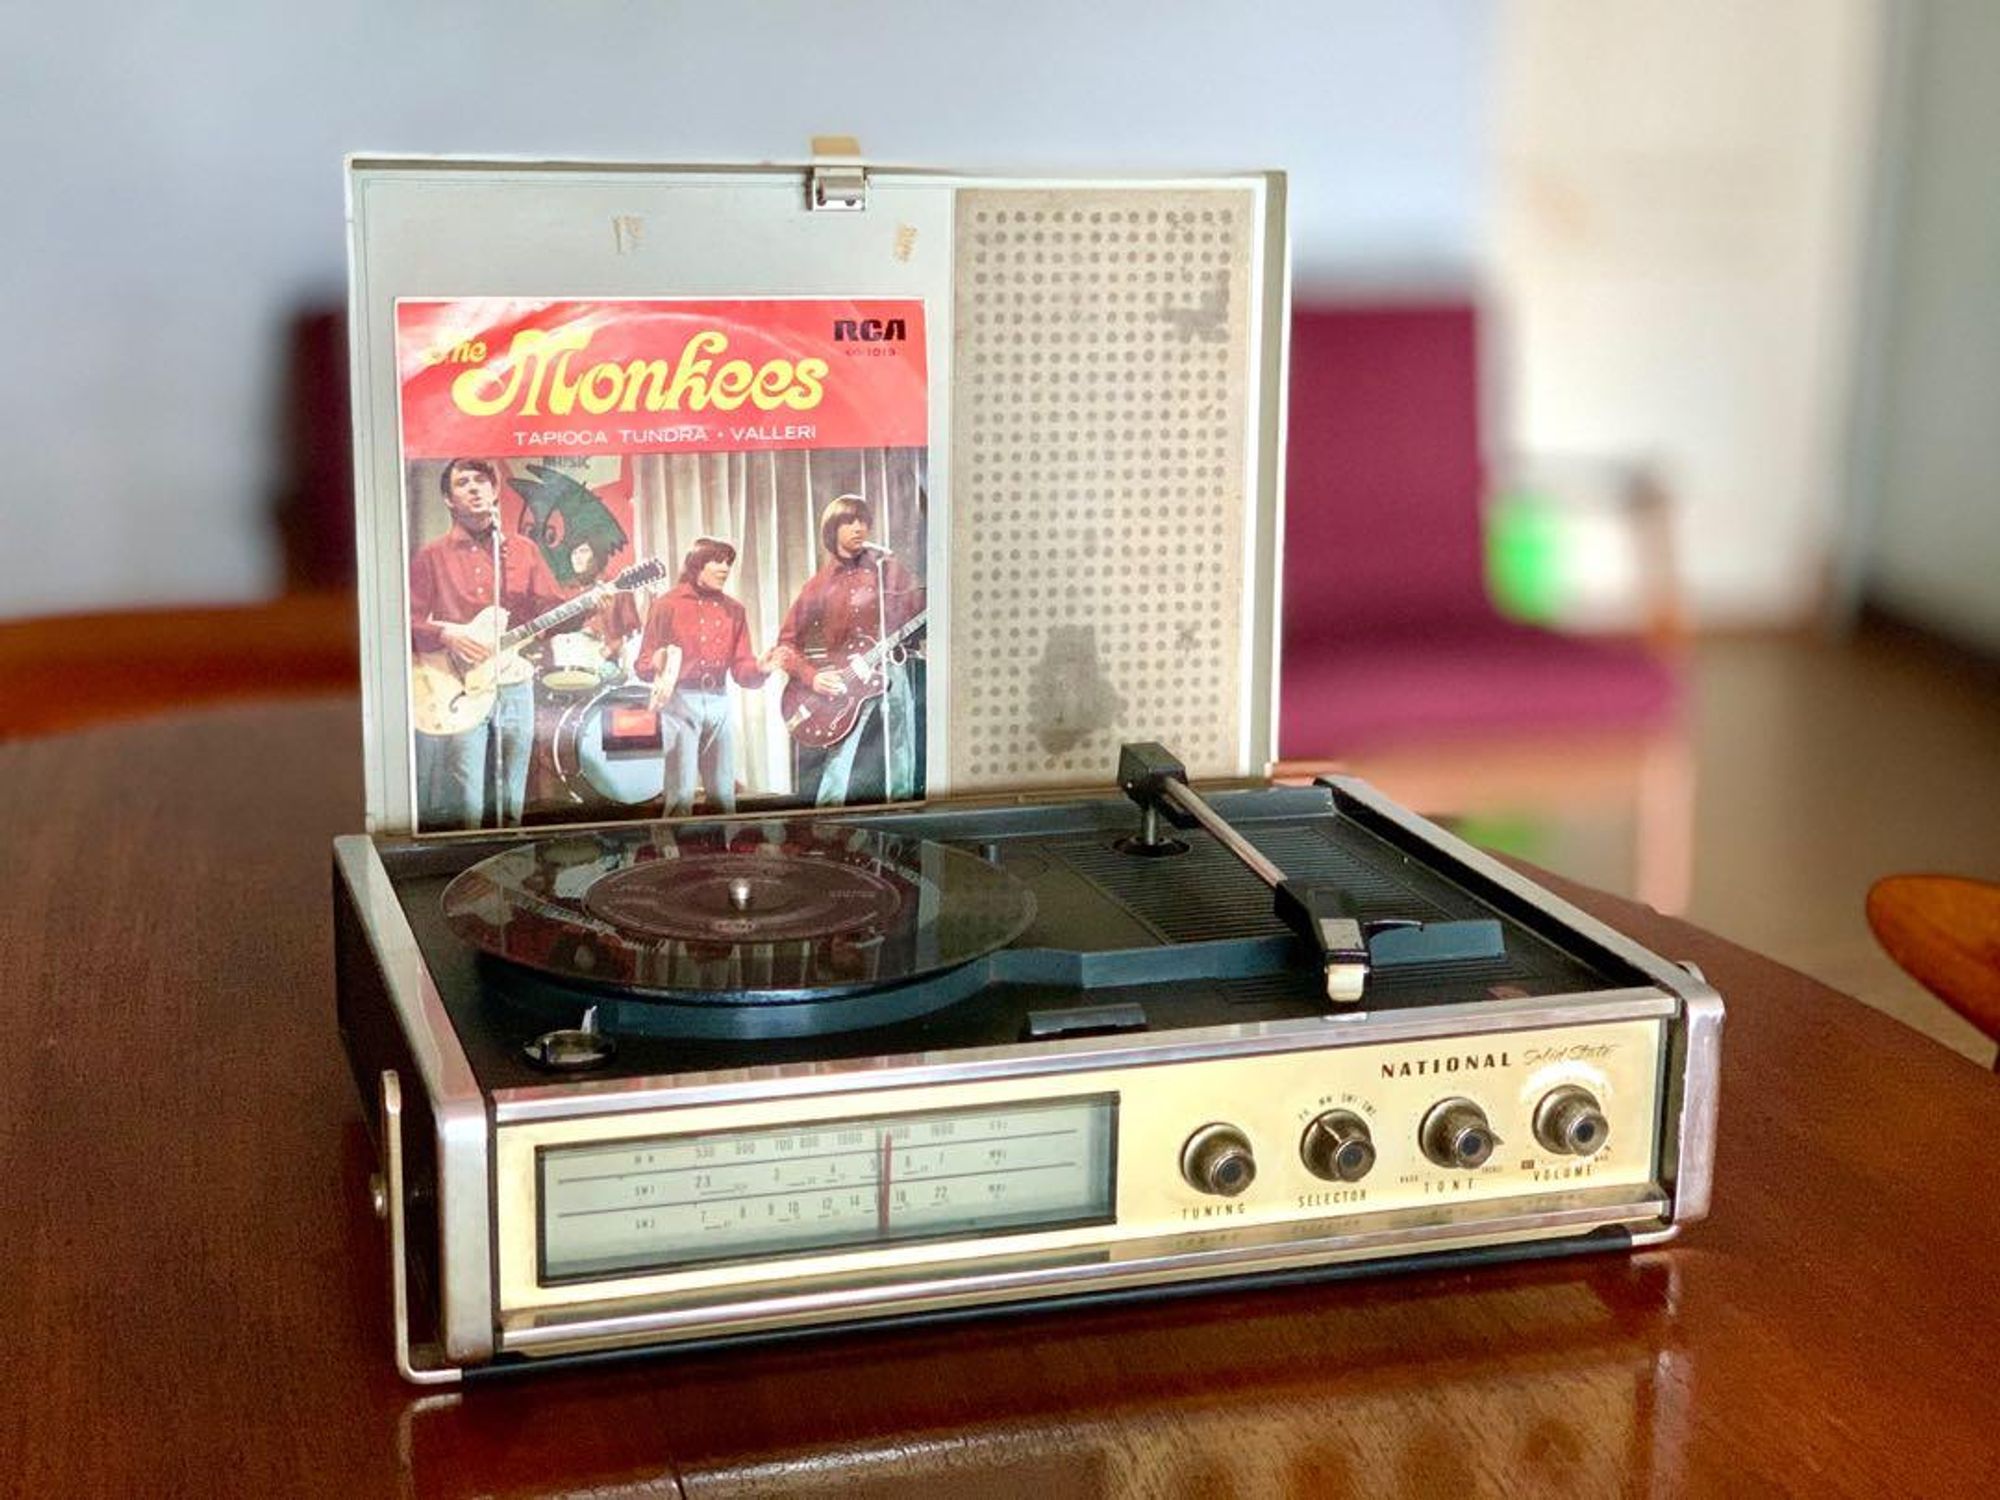 Vintage National record player. Image courtesy: Malaysia Carousell